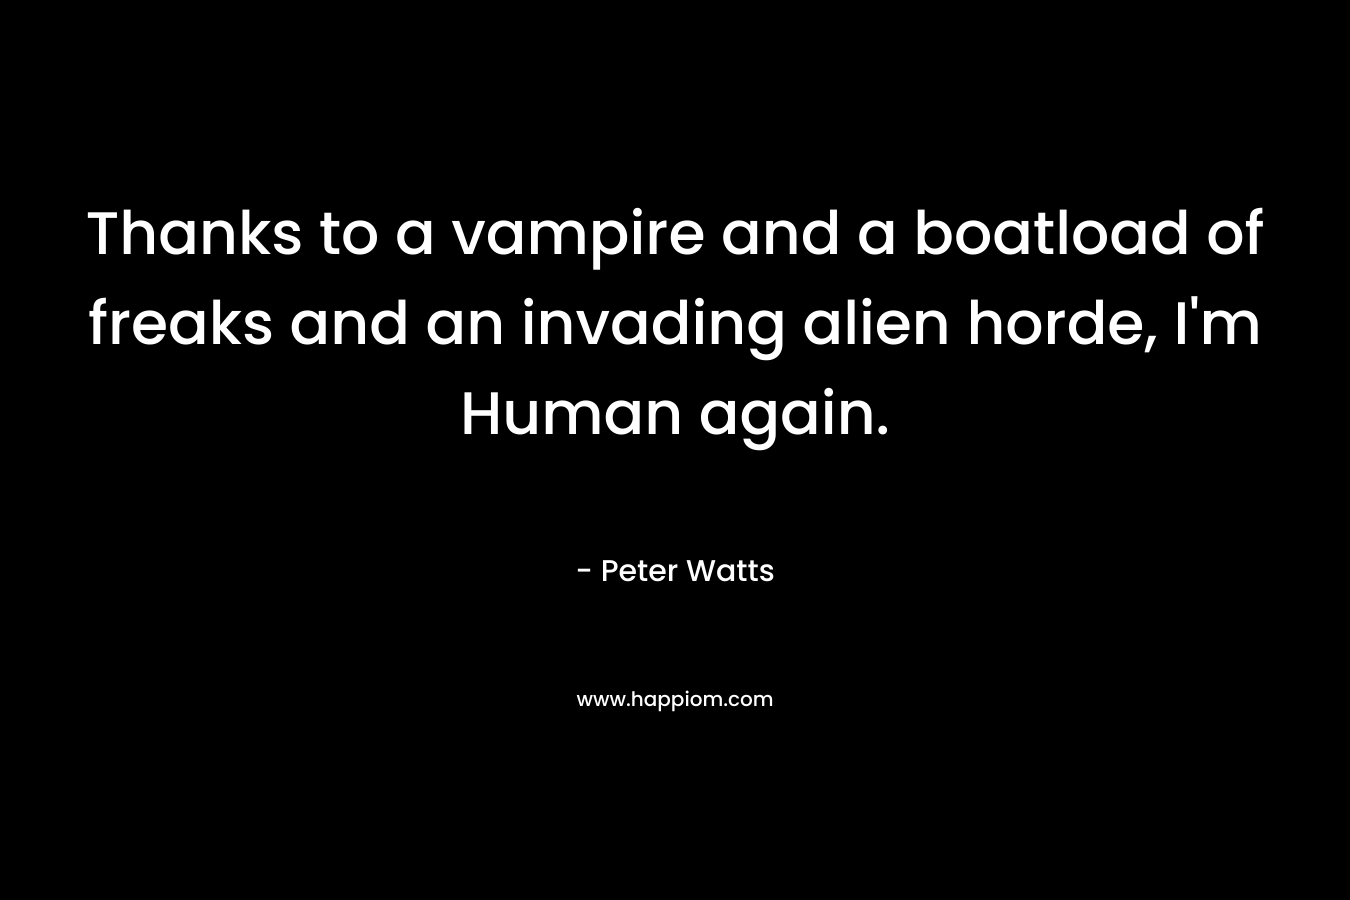 Thanks to a vampire and a boatload of freaks and an invading alien horde, I'm Human again.